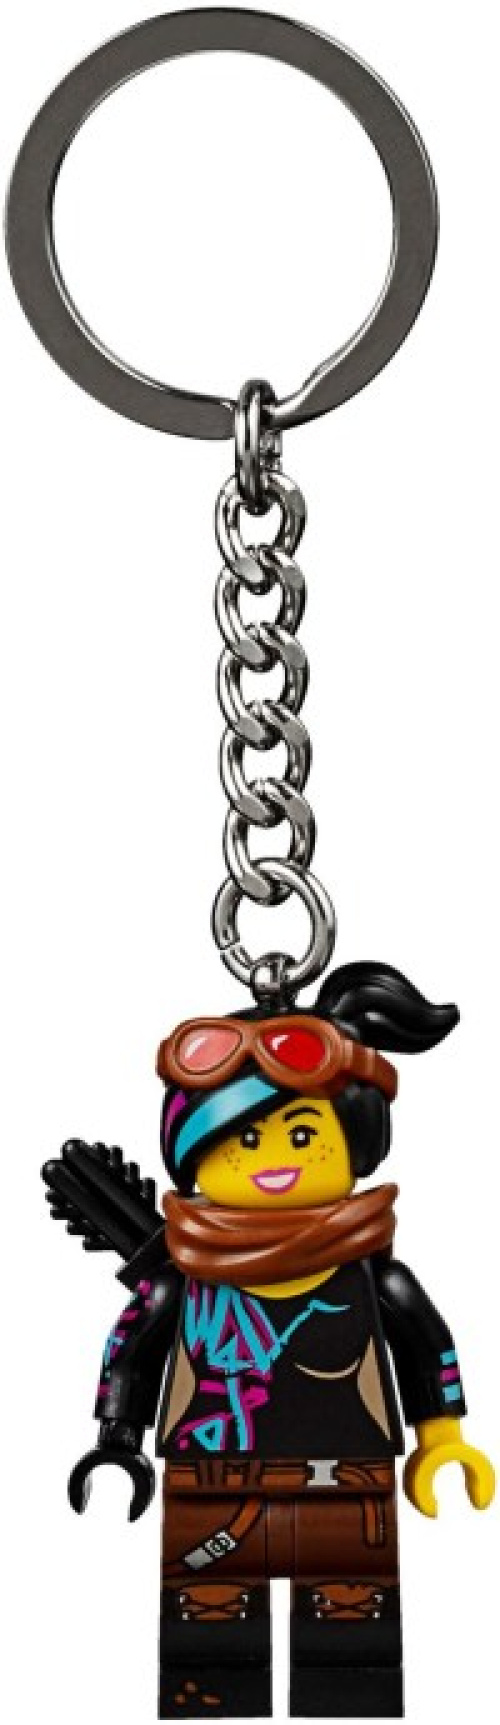 853868-1 Lucy Keyring